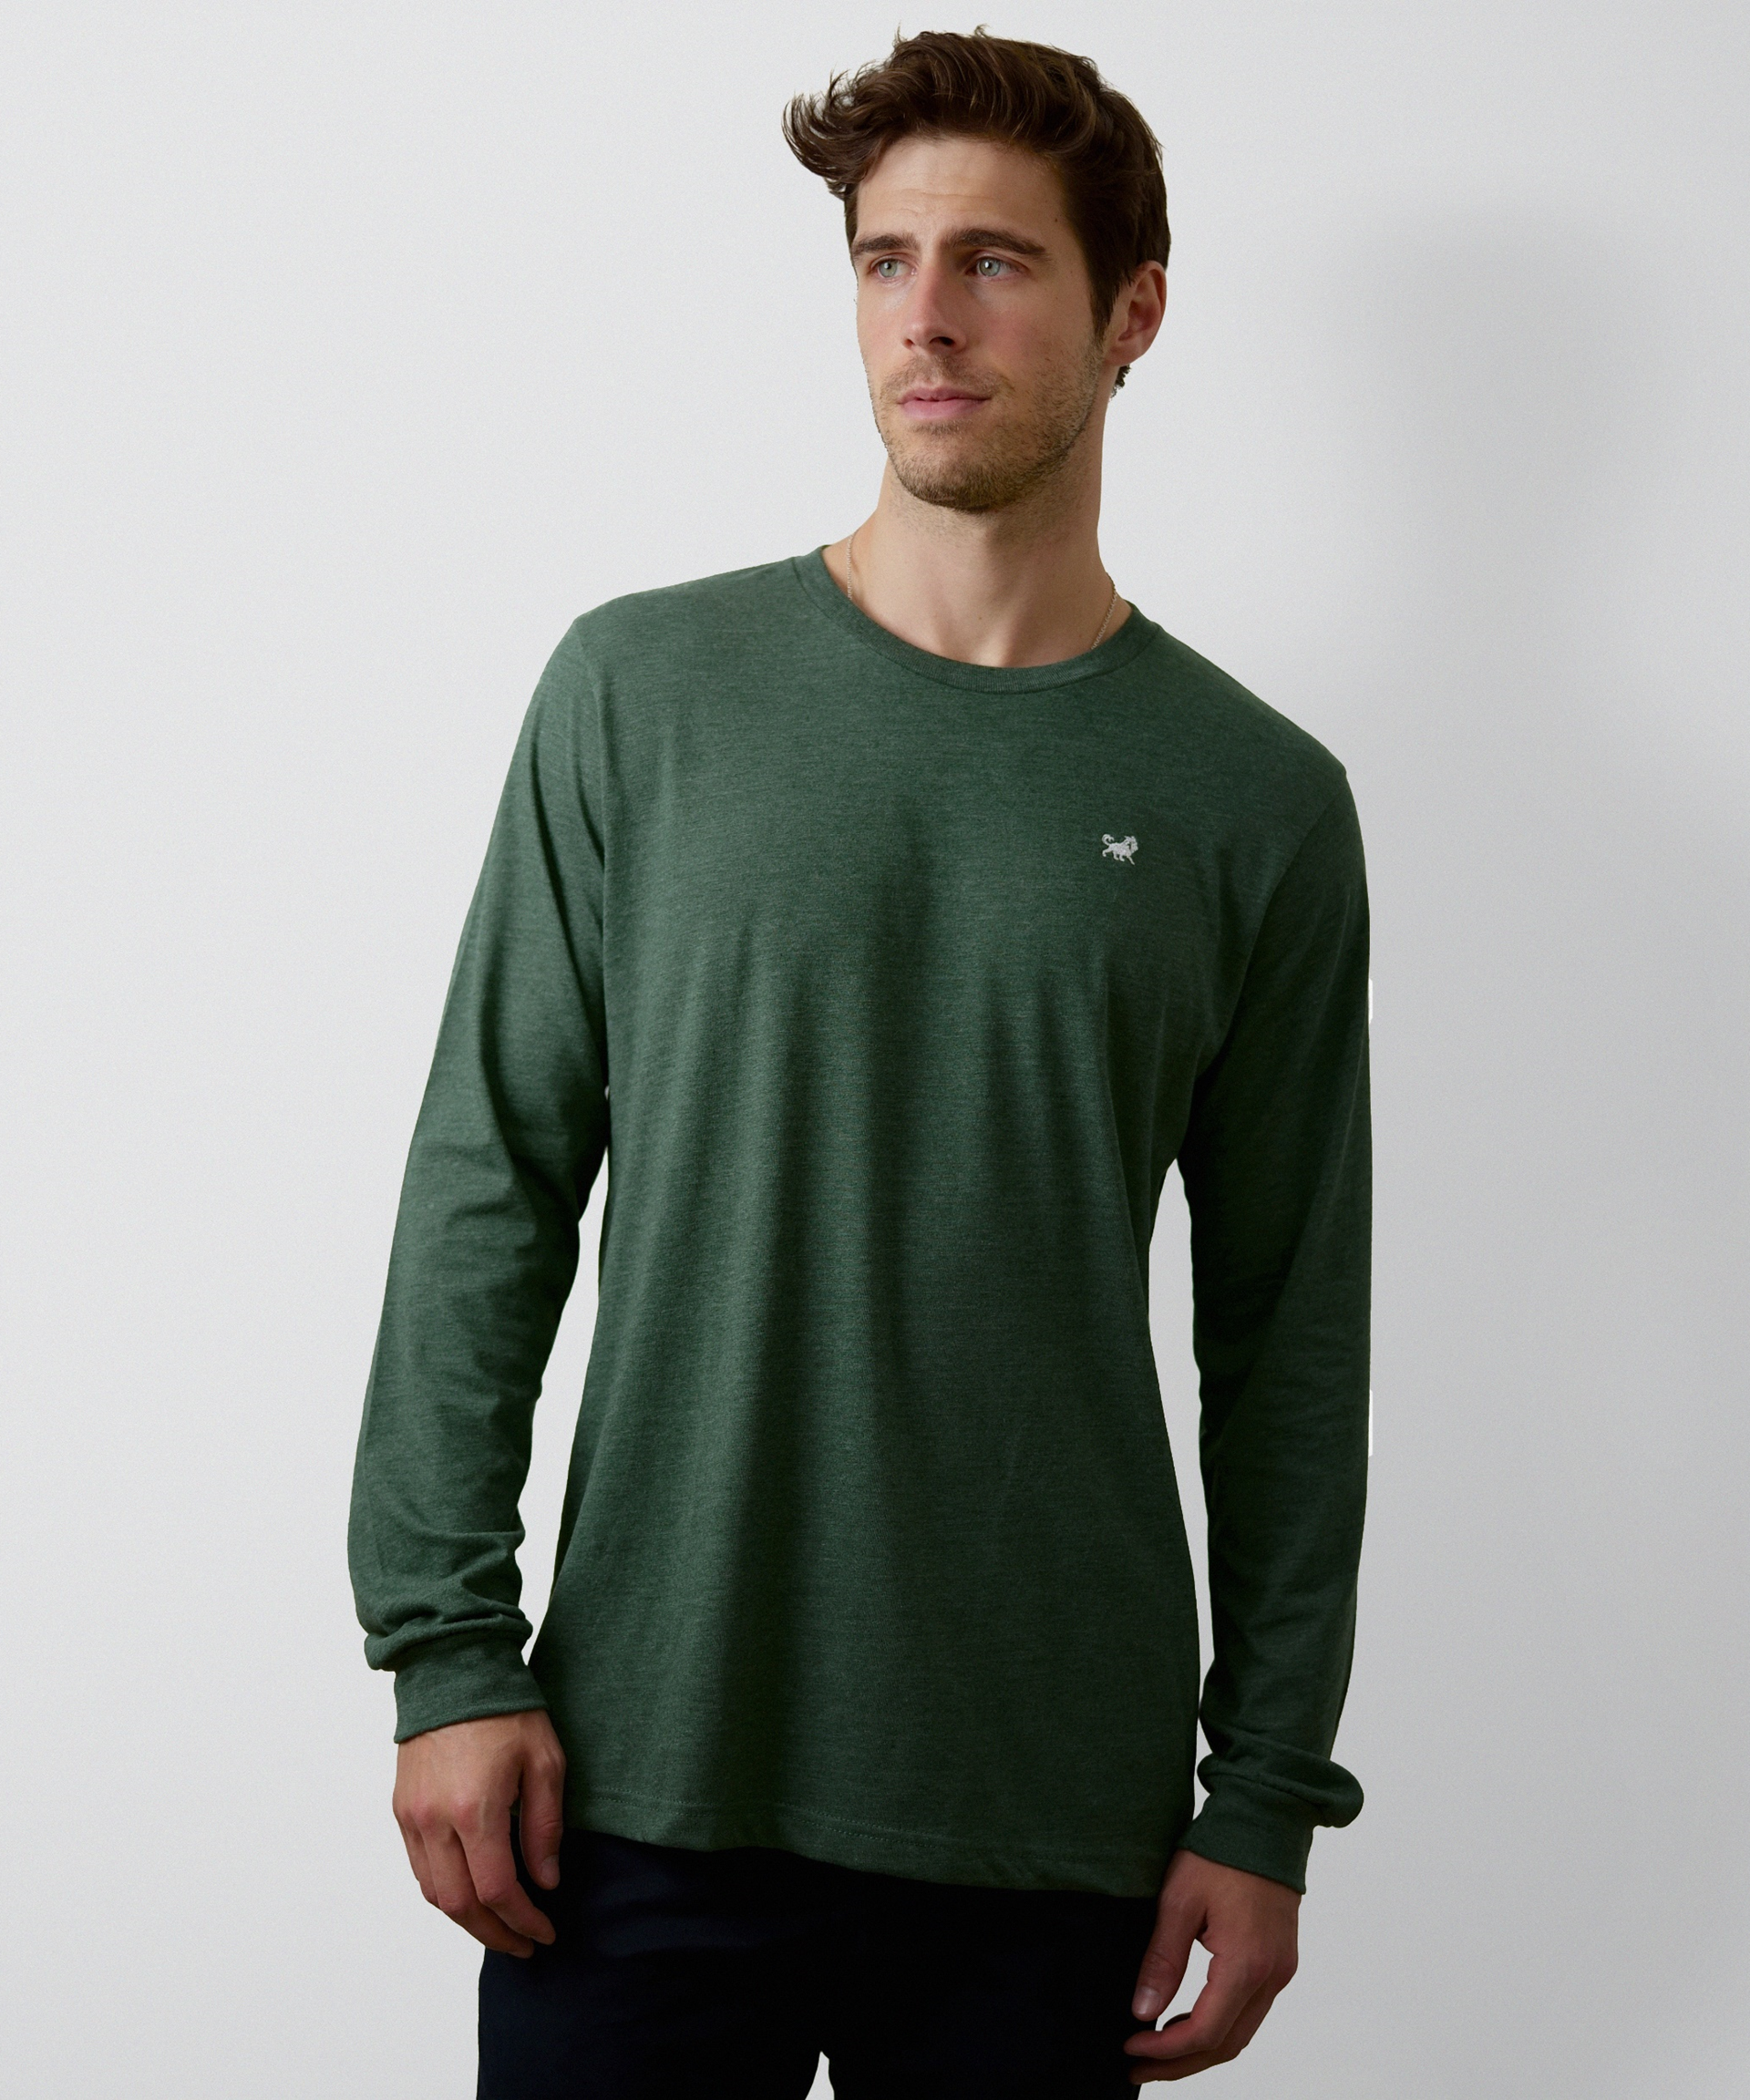 Signature Long Sleeve T-Shirt for Men (Heather Forest)